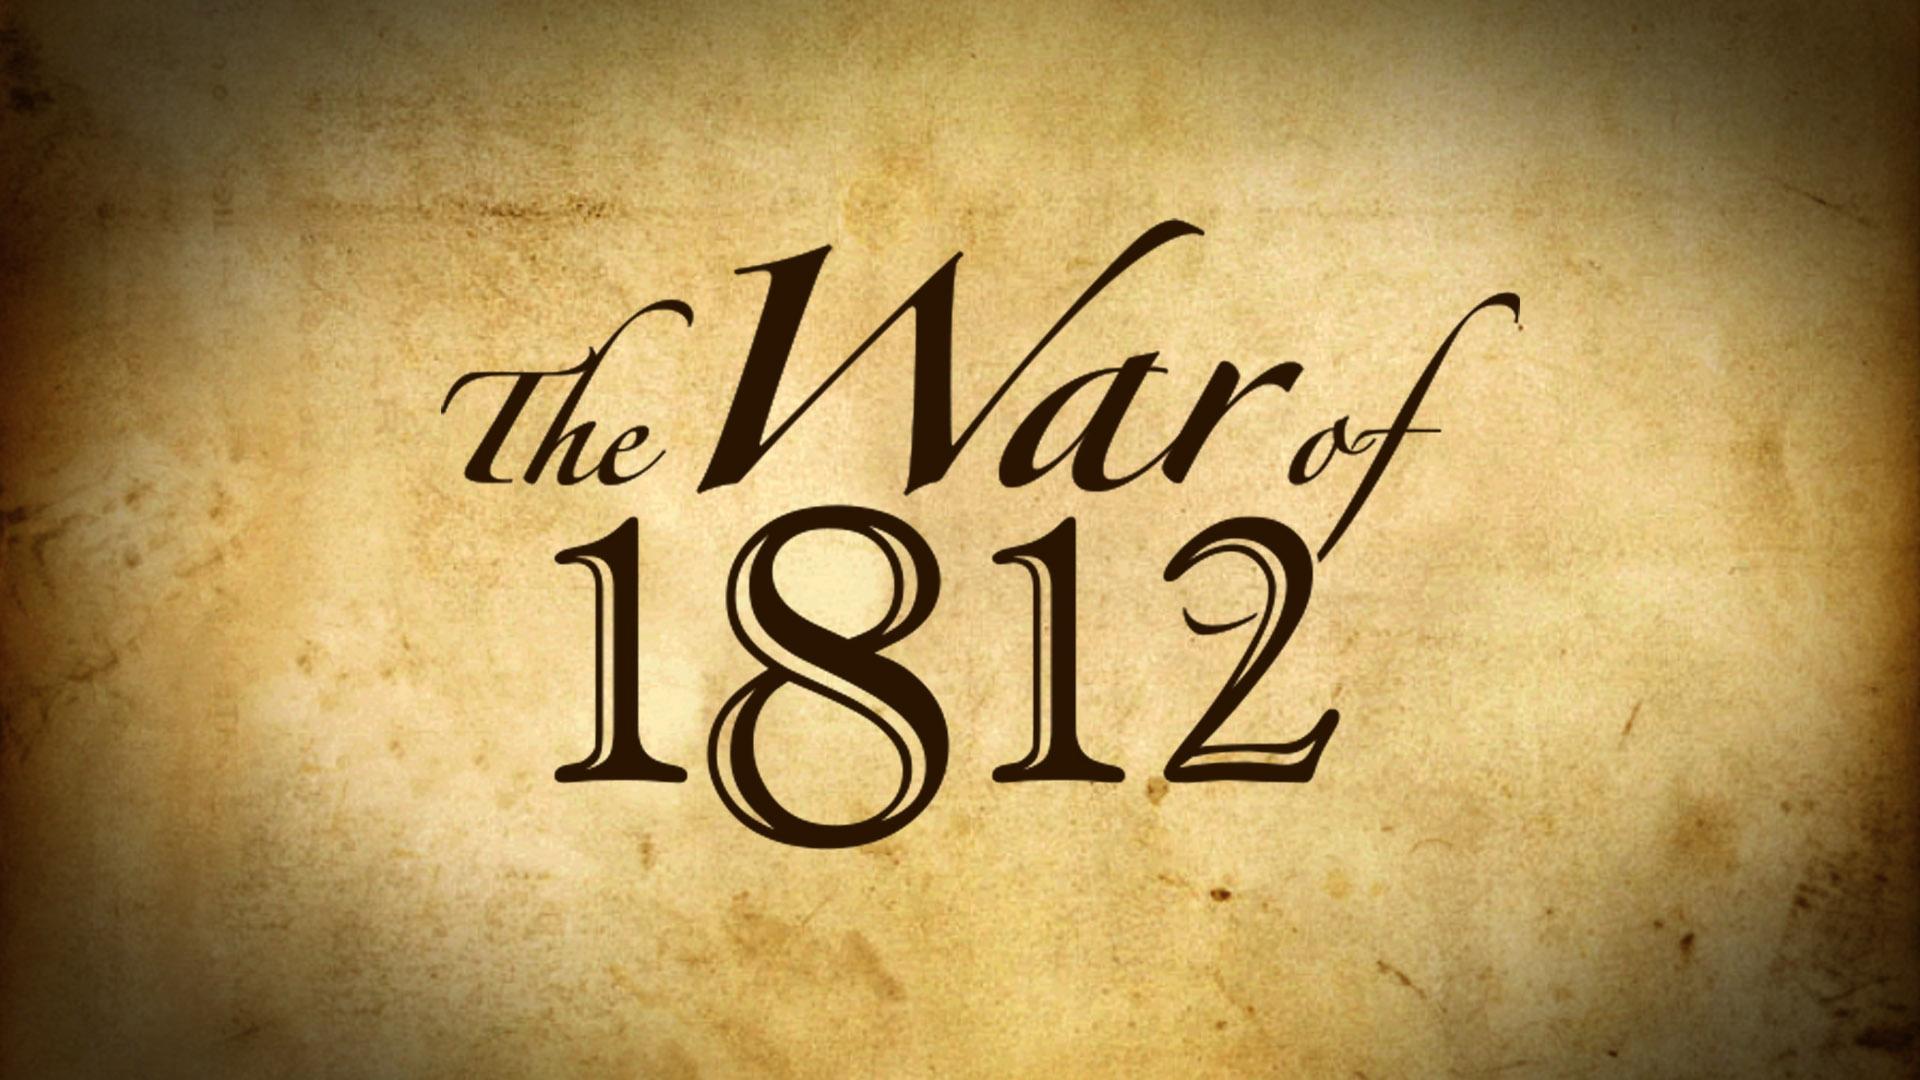 who had the superior navy in the war of 1812